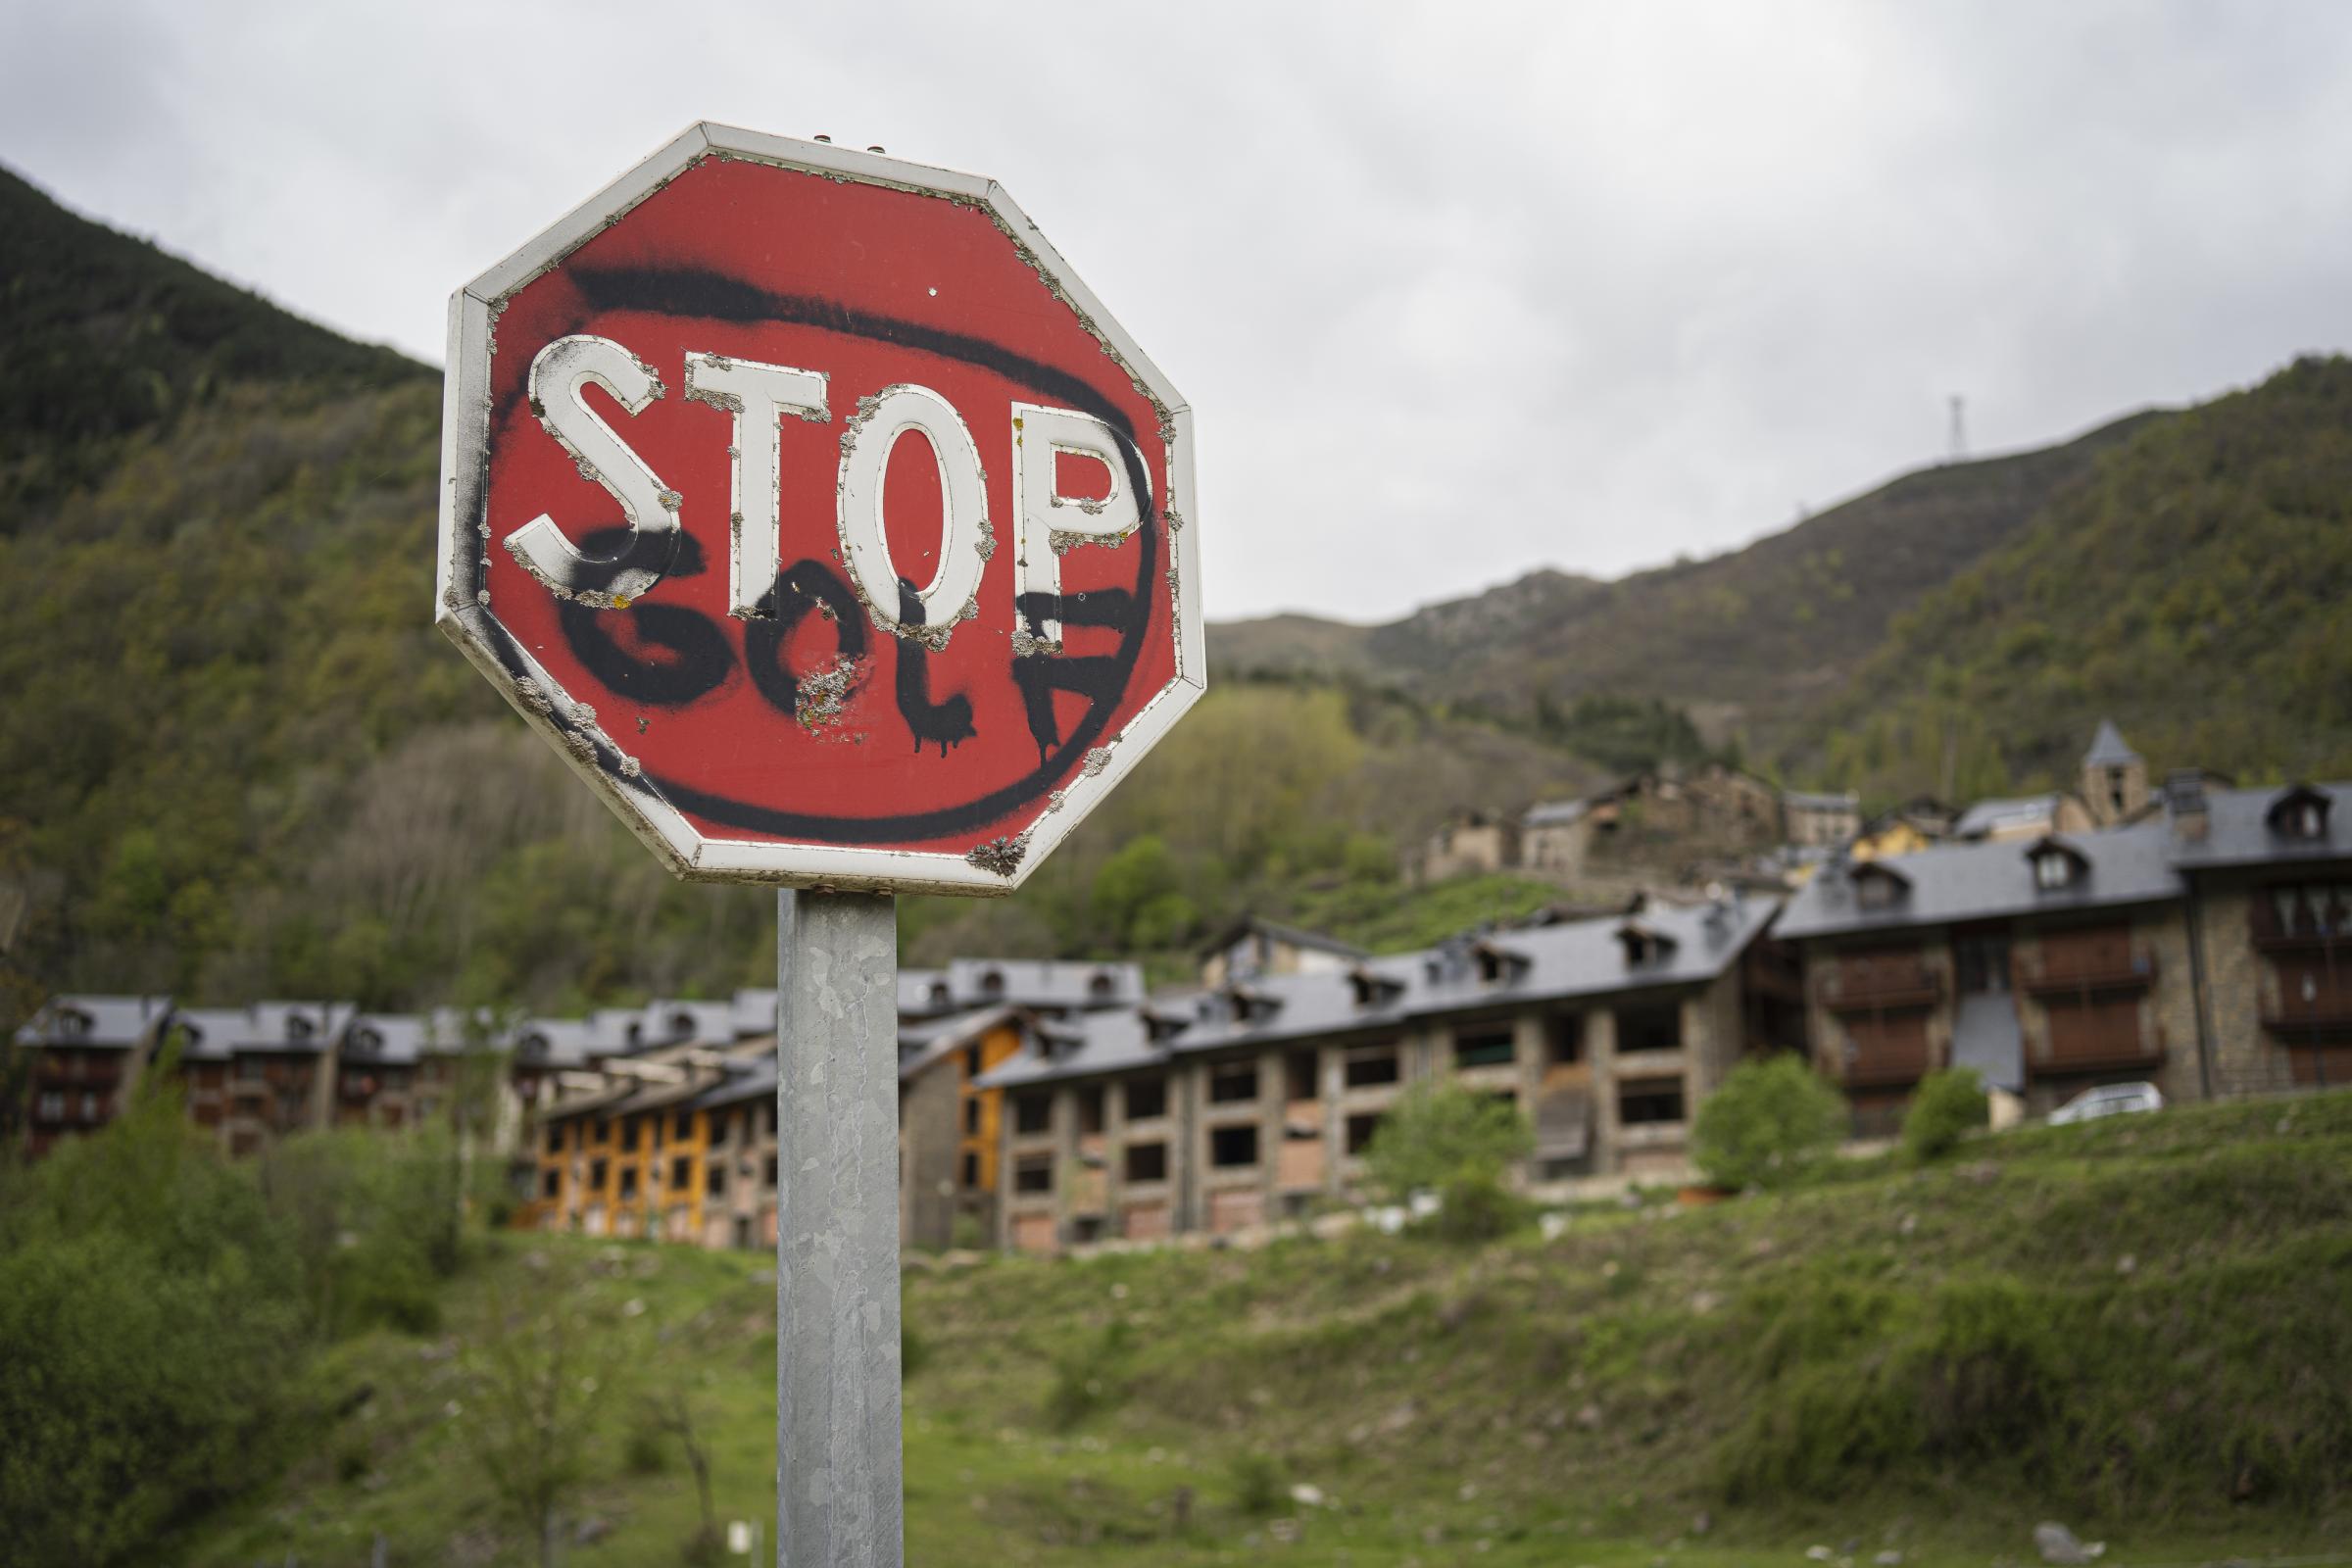  A STOP sign at the entrance to Espui where a villager has added &quot;golf&quot; in...